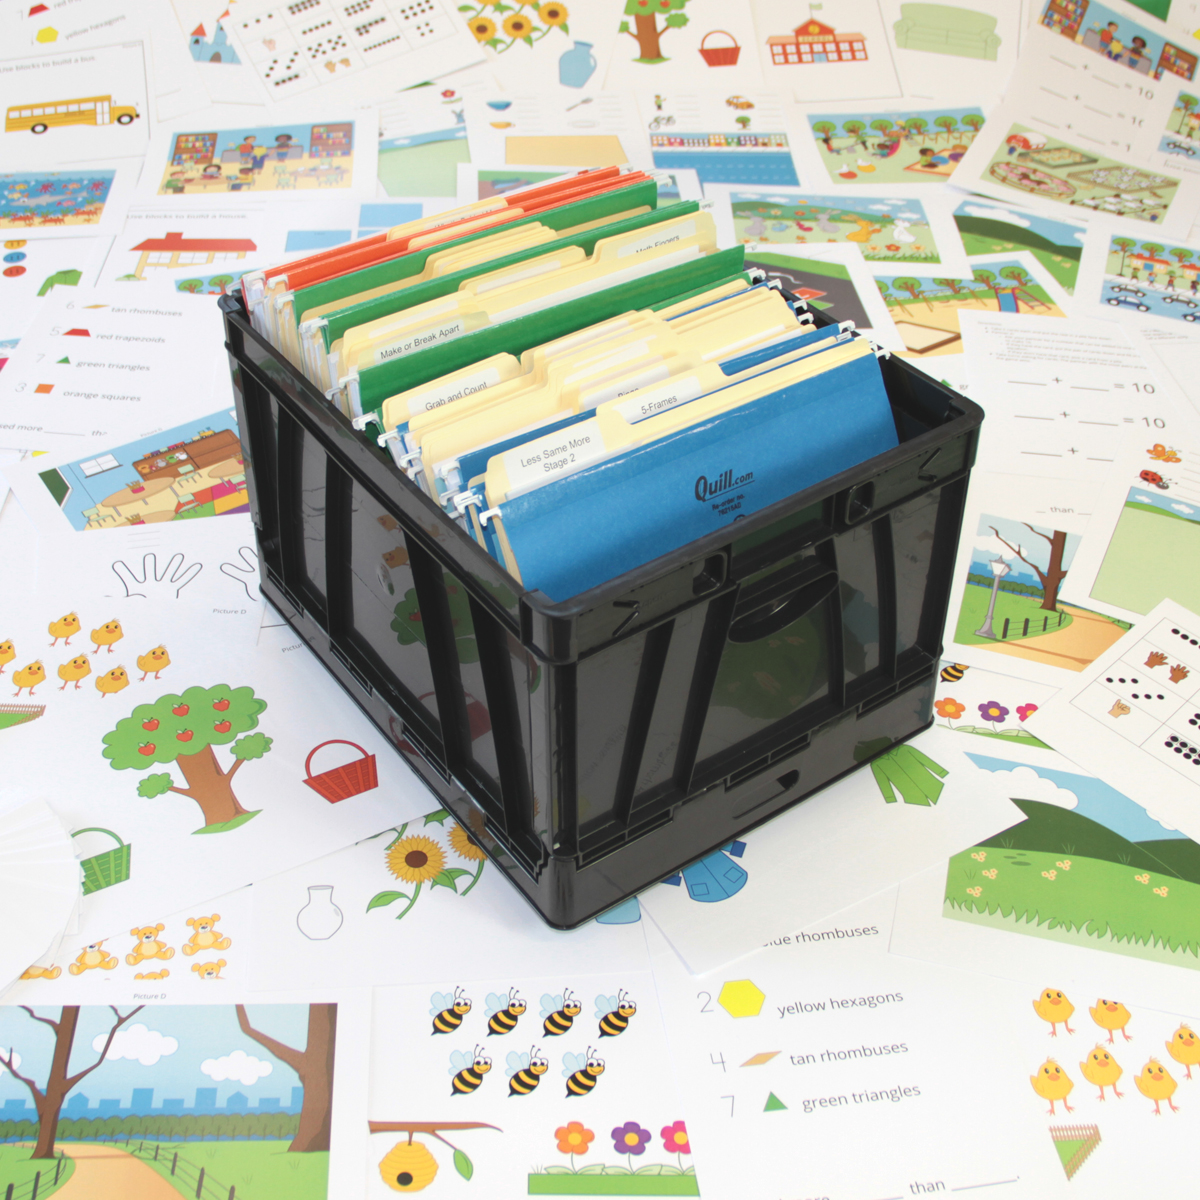 A sample kit, with hanging folders, worksheets, and organized in a crate